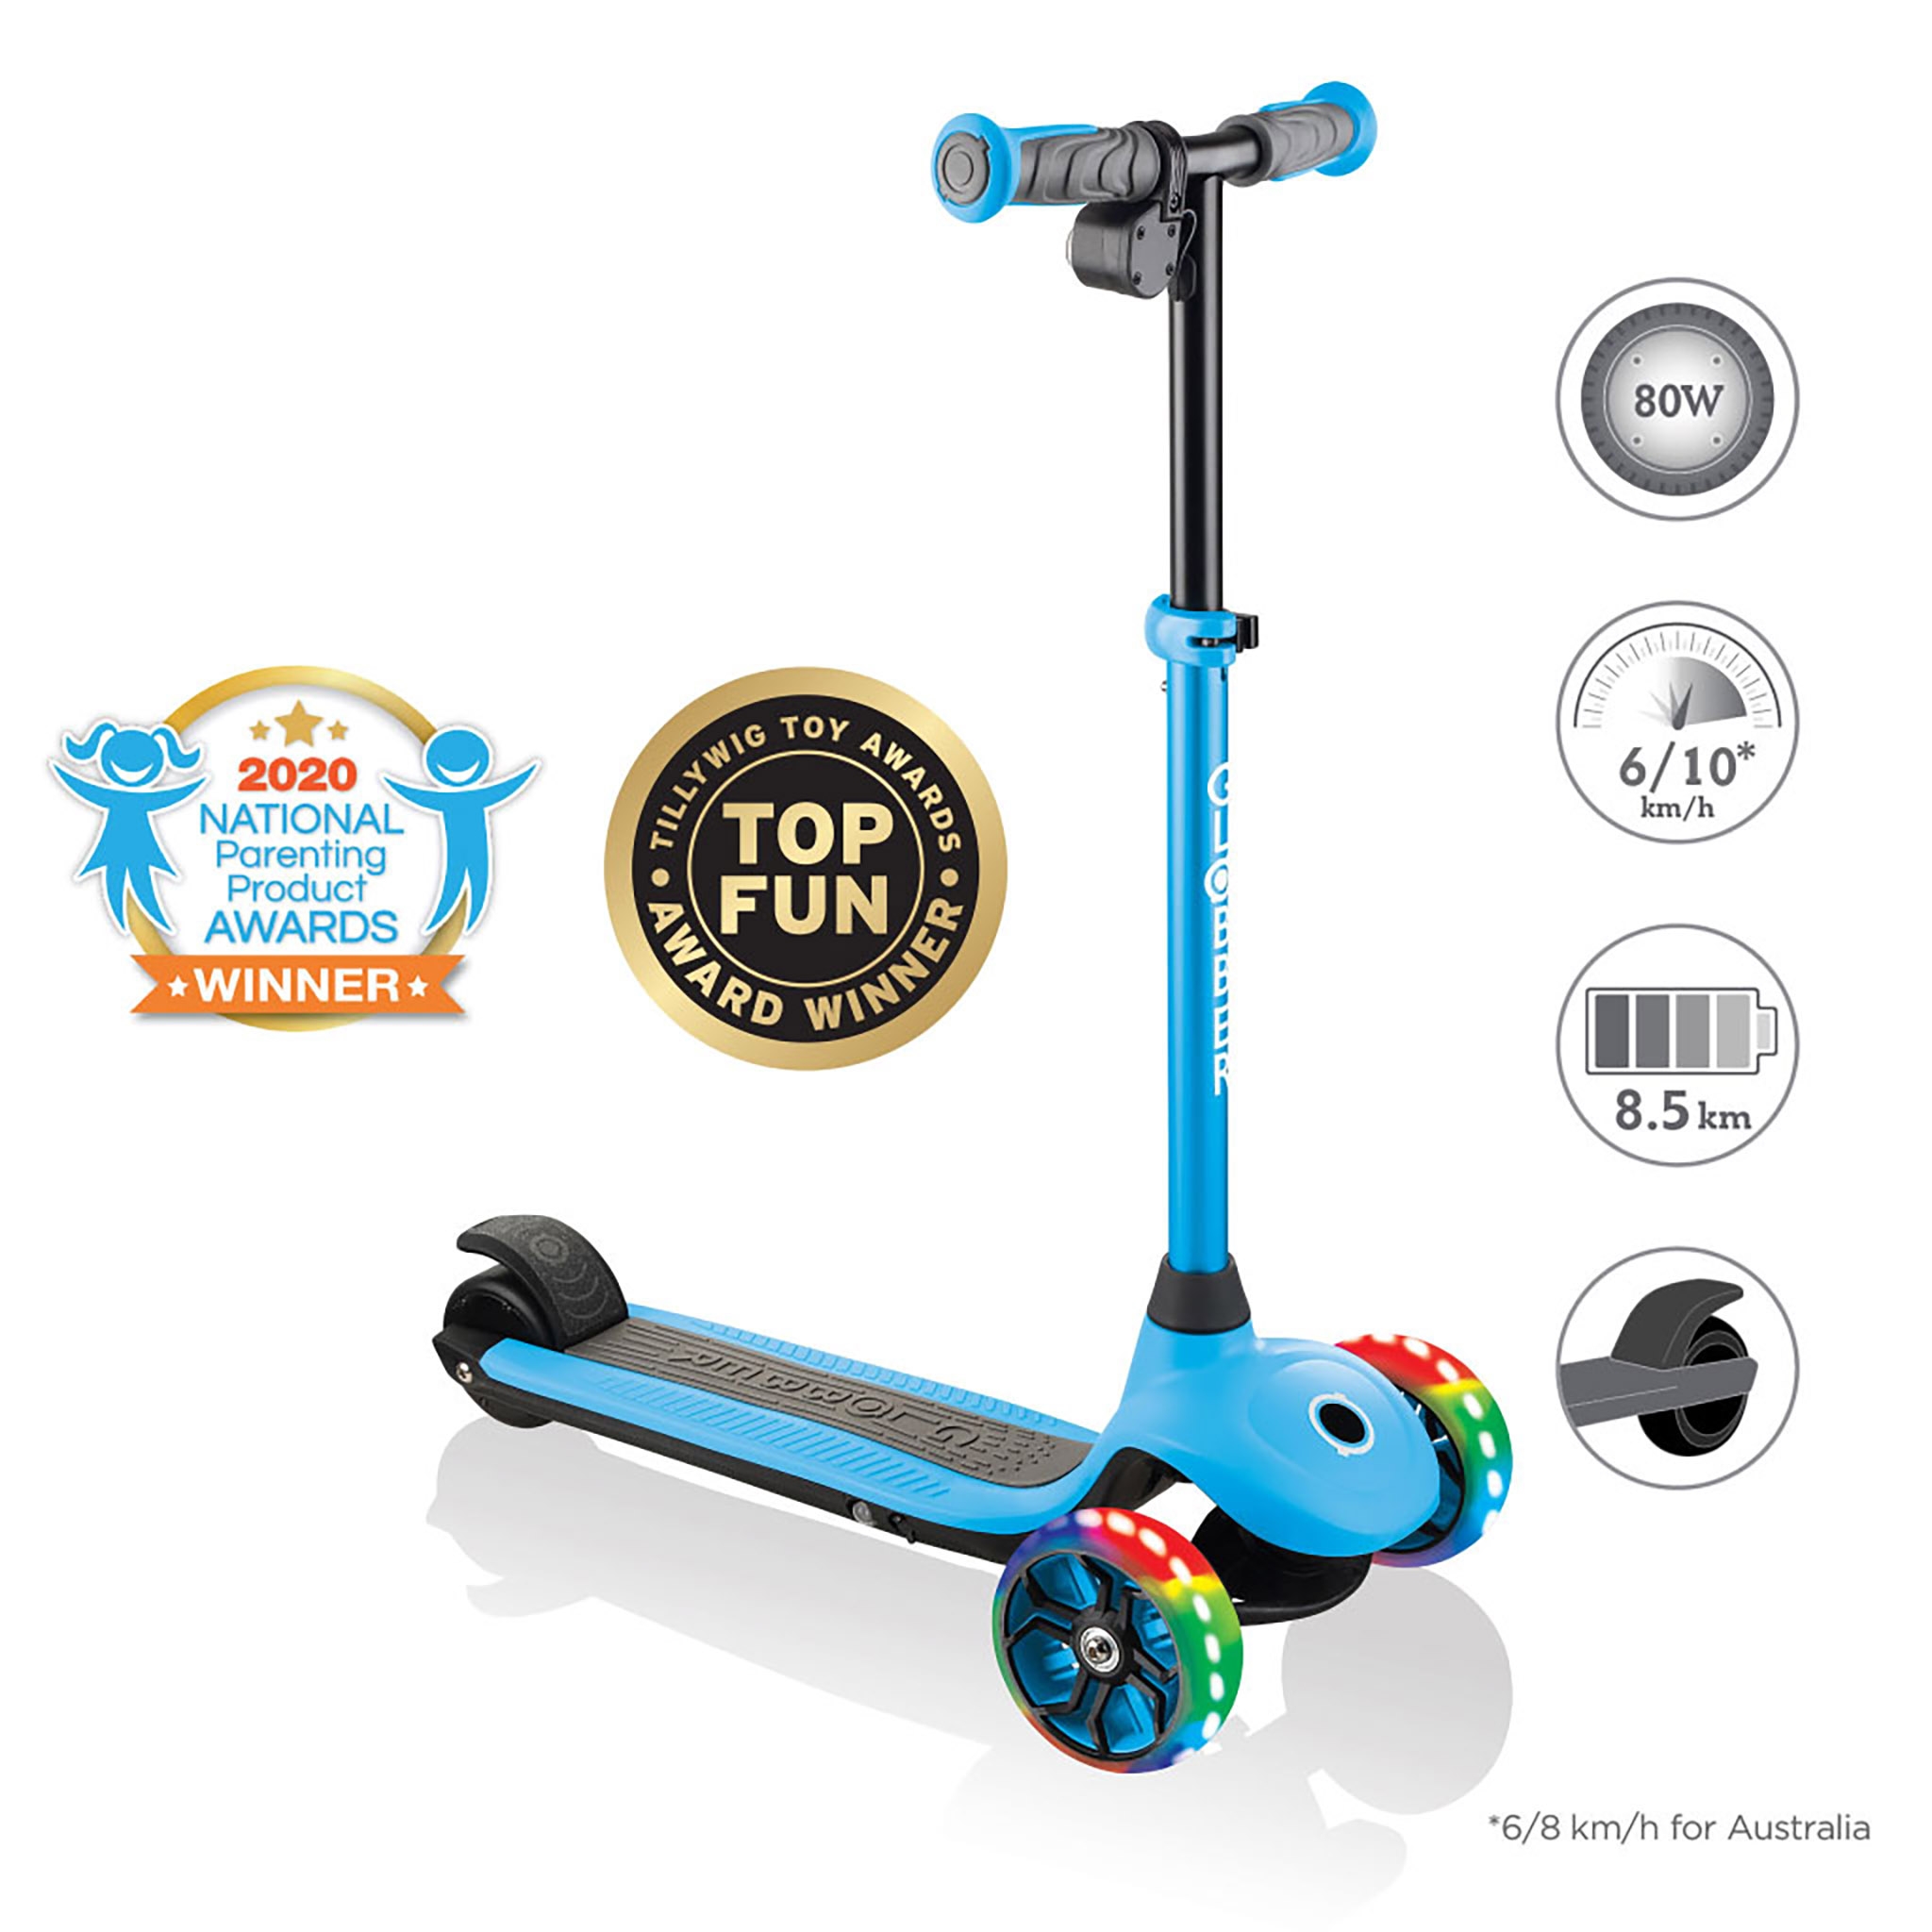 Globber-ONE-K-E-MOTION-4-award-winning-3-wheel-electric-scooter-for-boys-and-girls-with-80W-hub-motor 0